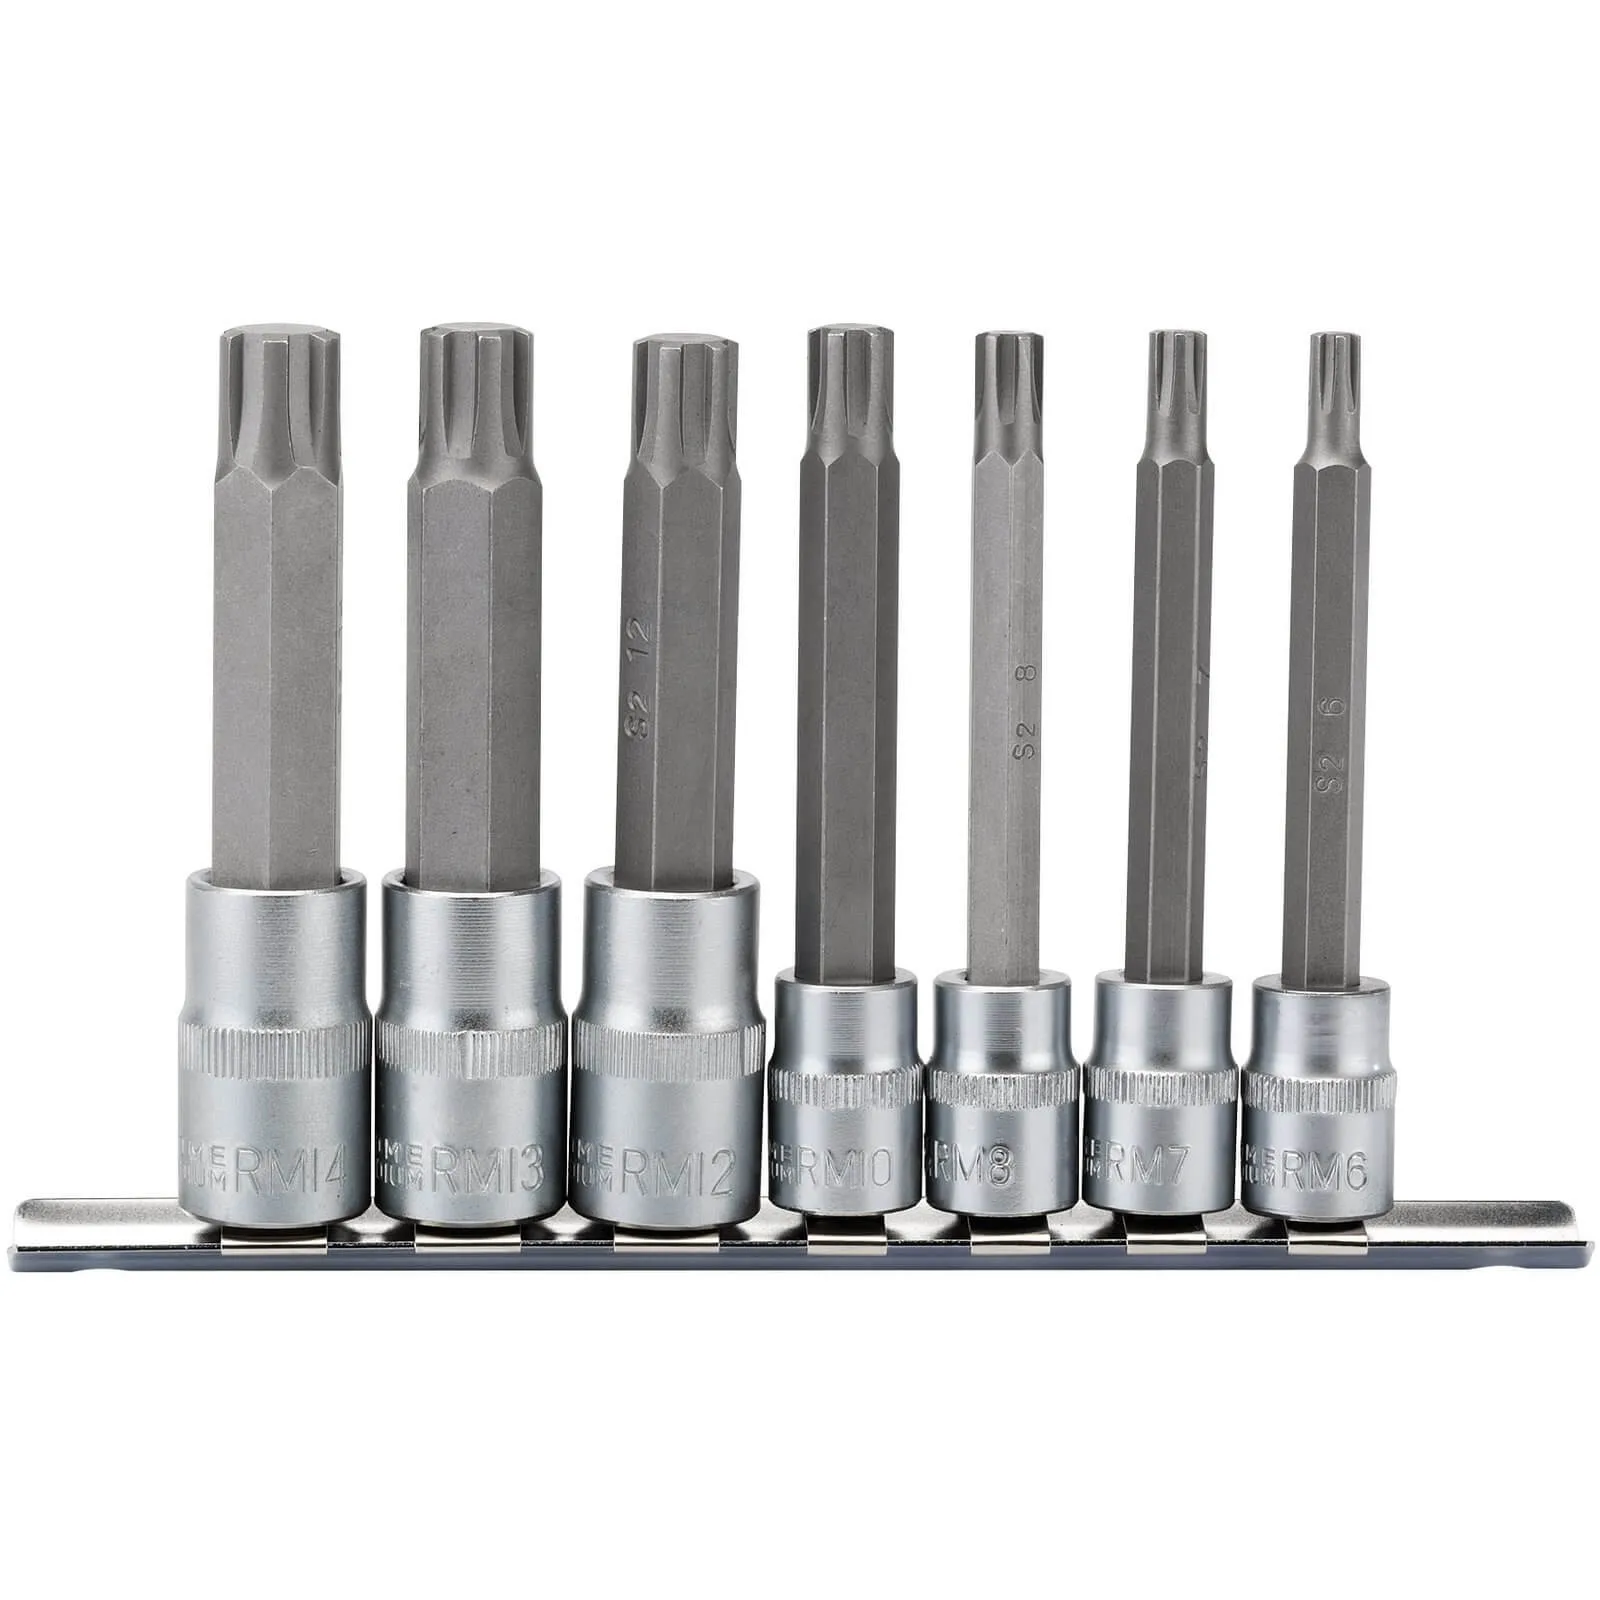 Draper 7 Piece 3/8" and 1/2" Drive Ribe Socket and Bit Set - Combination, 100mm